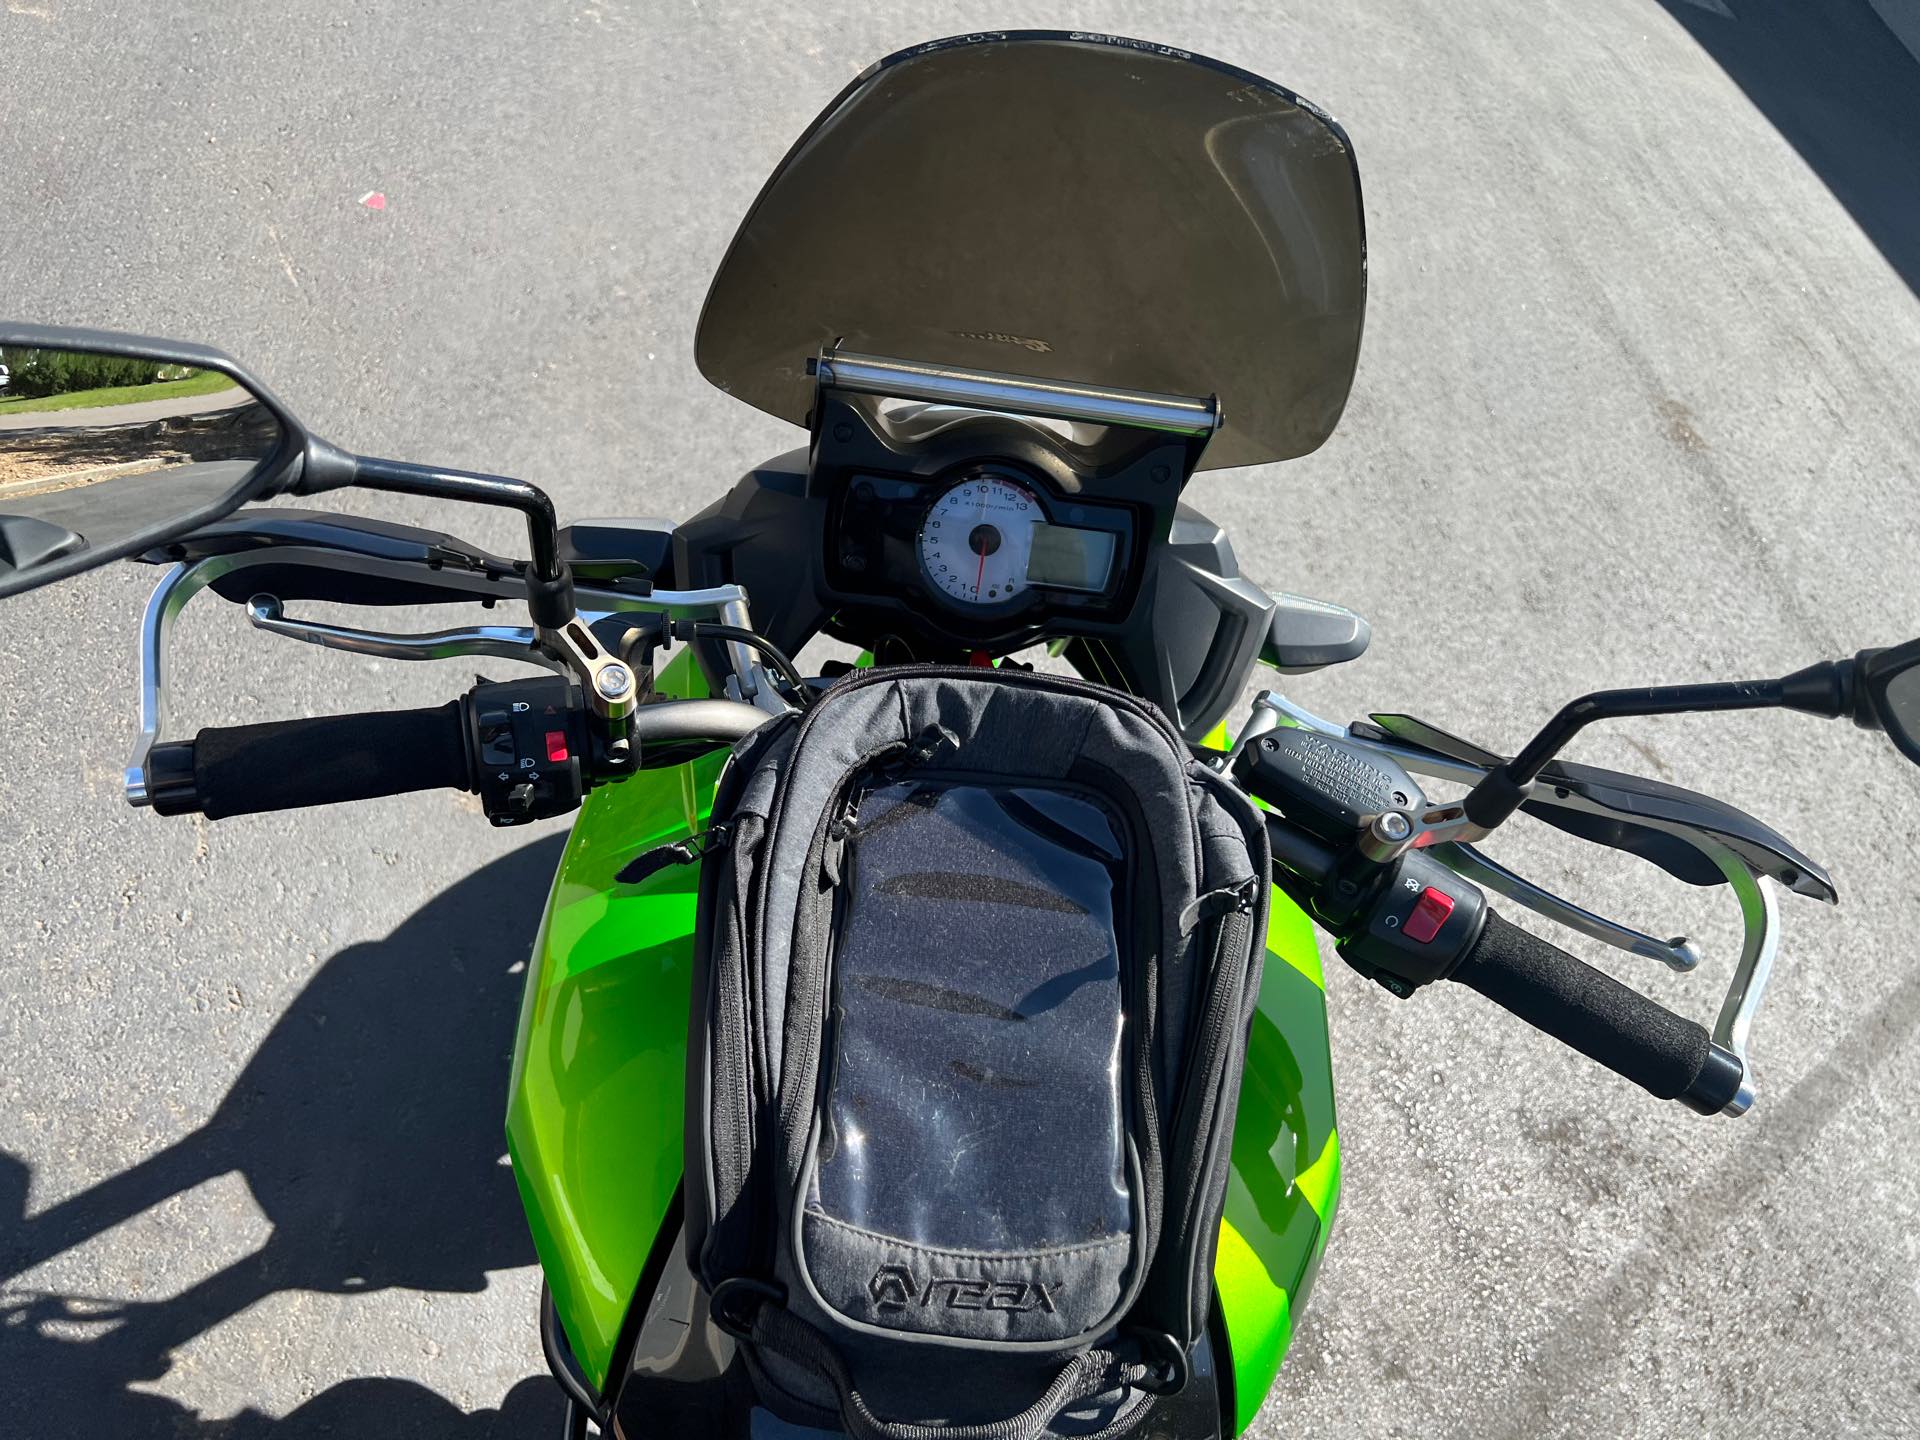 2014 Kawasaki Versys ABS at Aces Motorcycles - Fort Collins